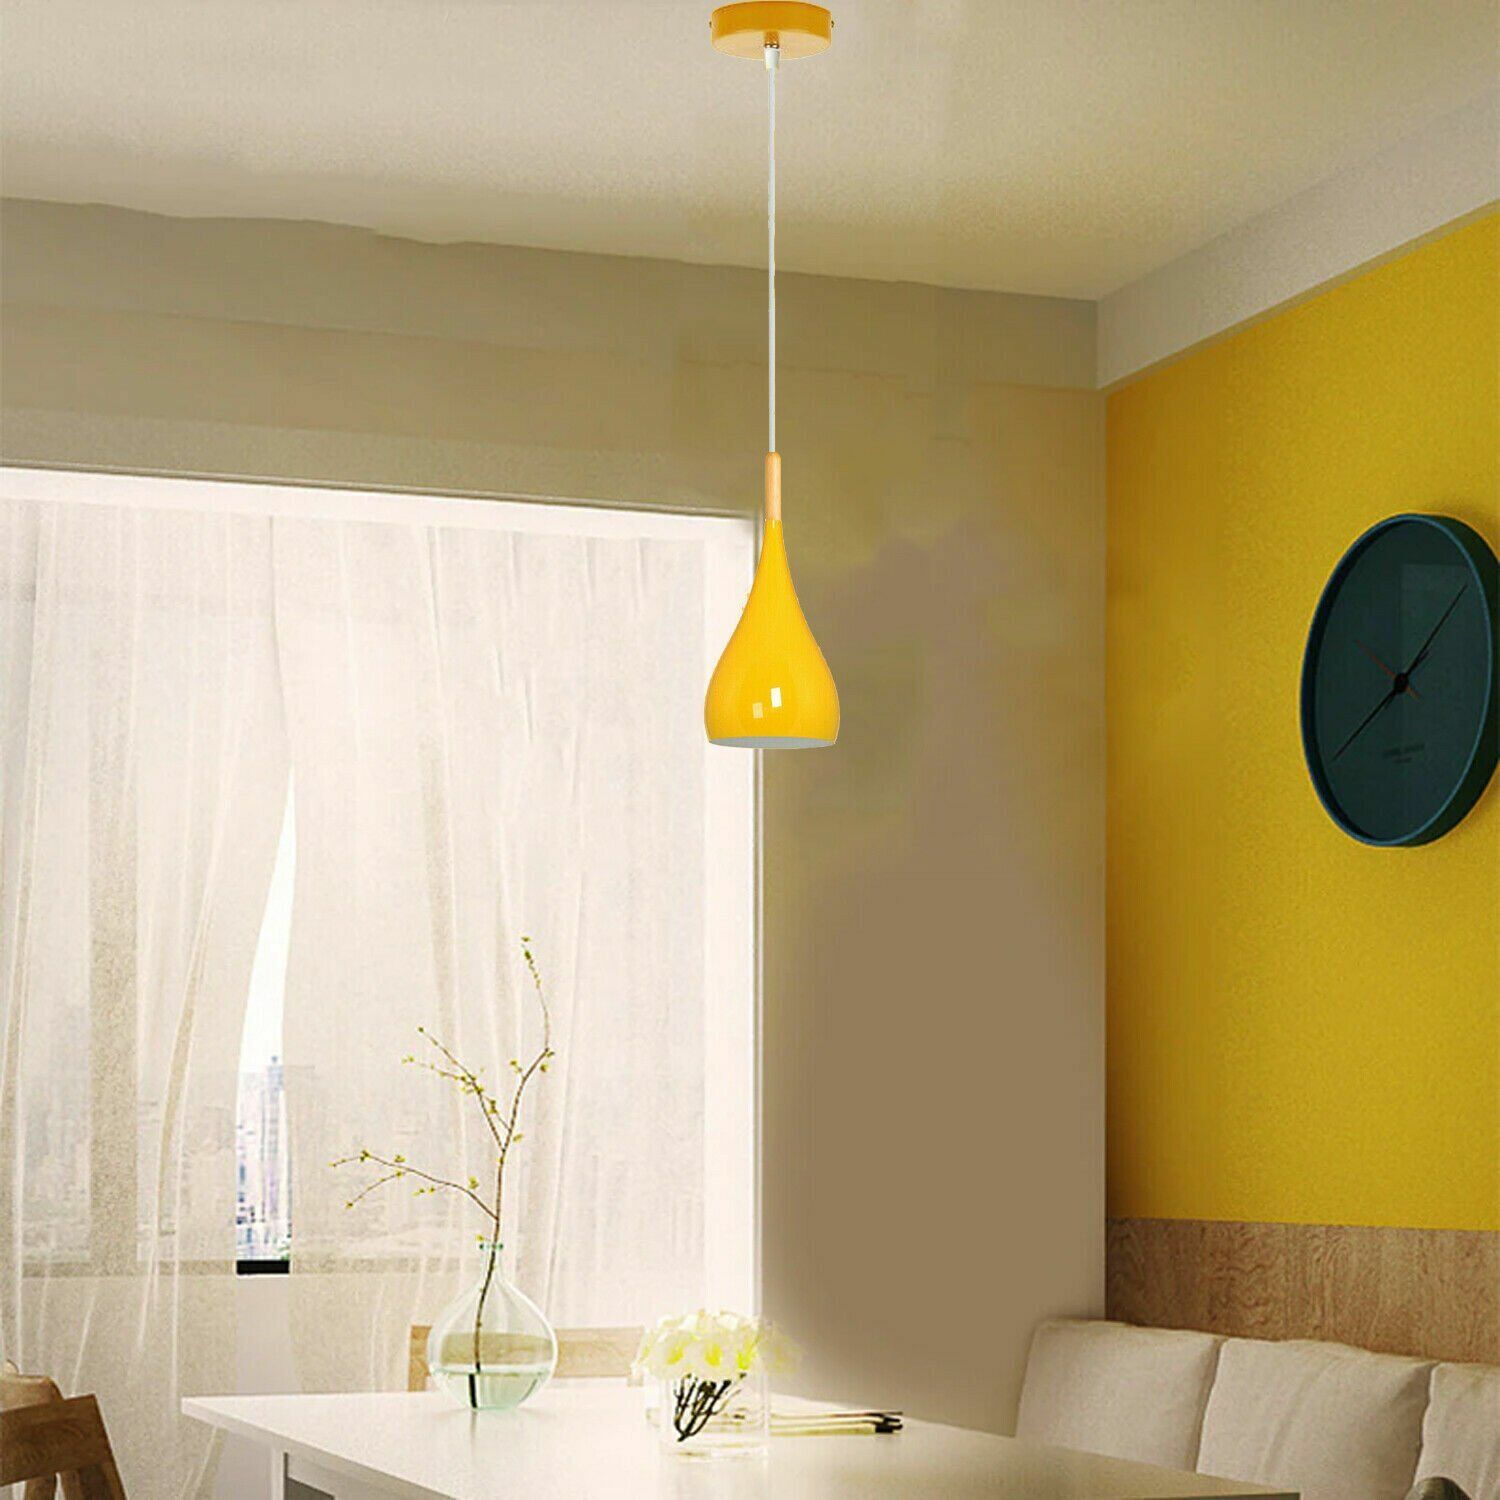 yellow ceiling pendant light over Dining table